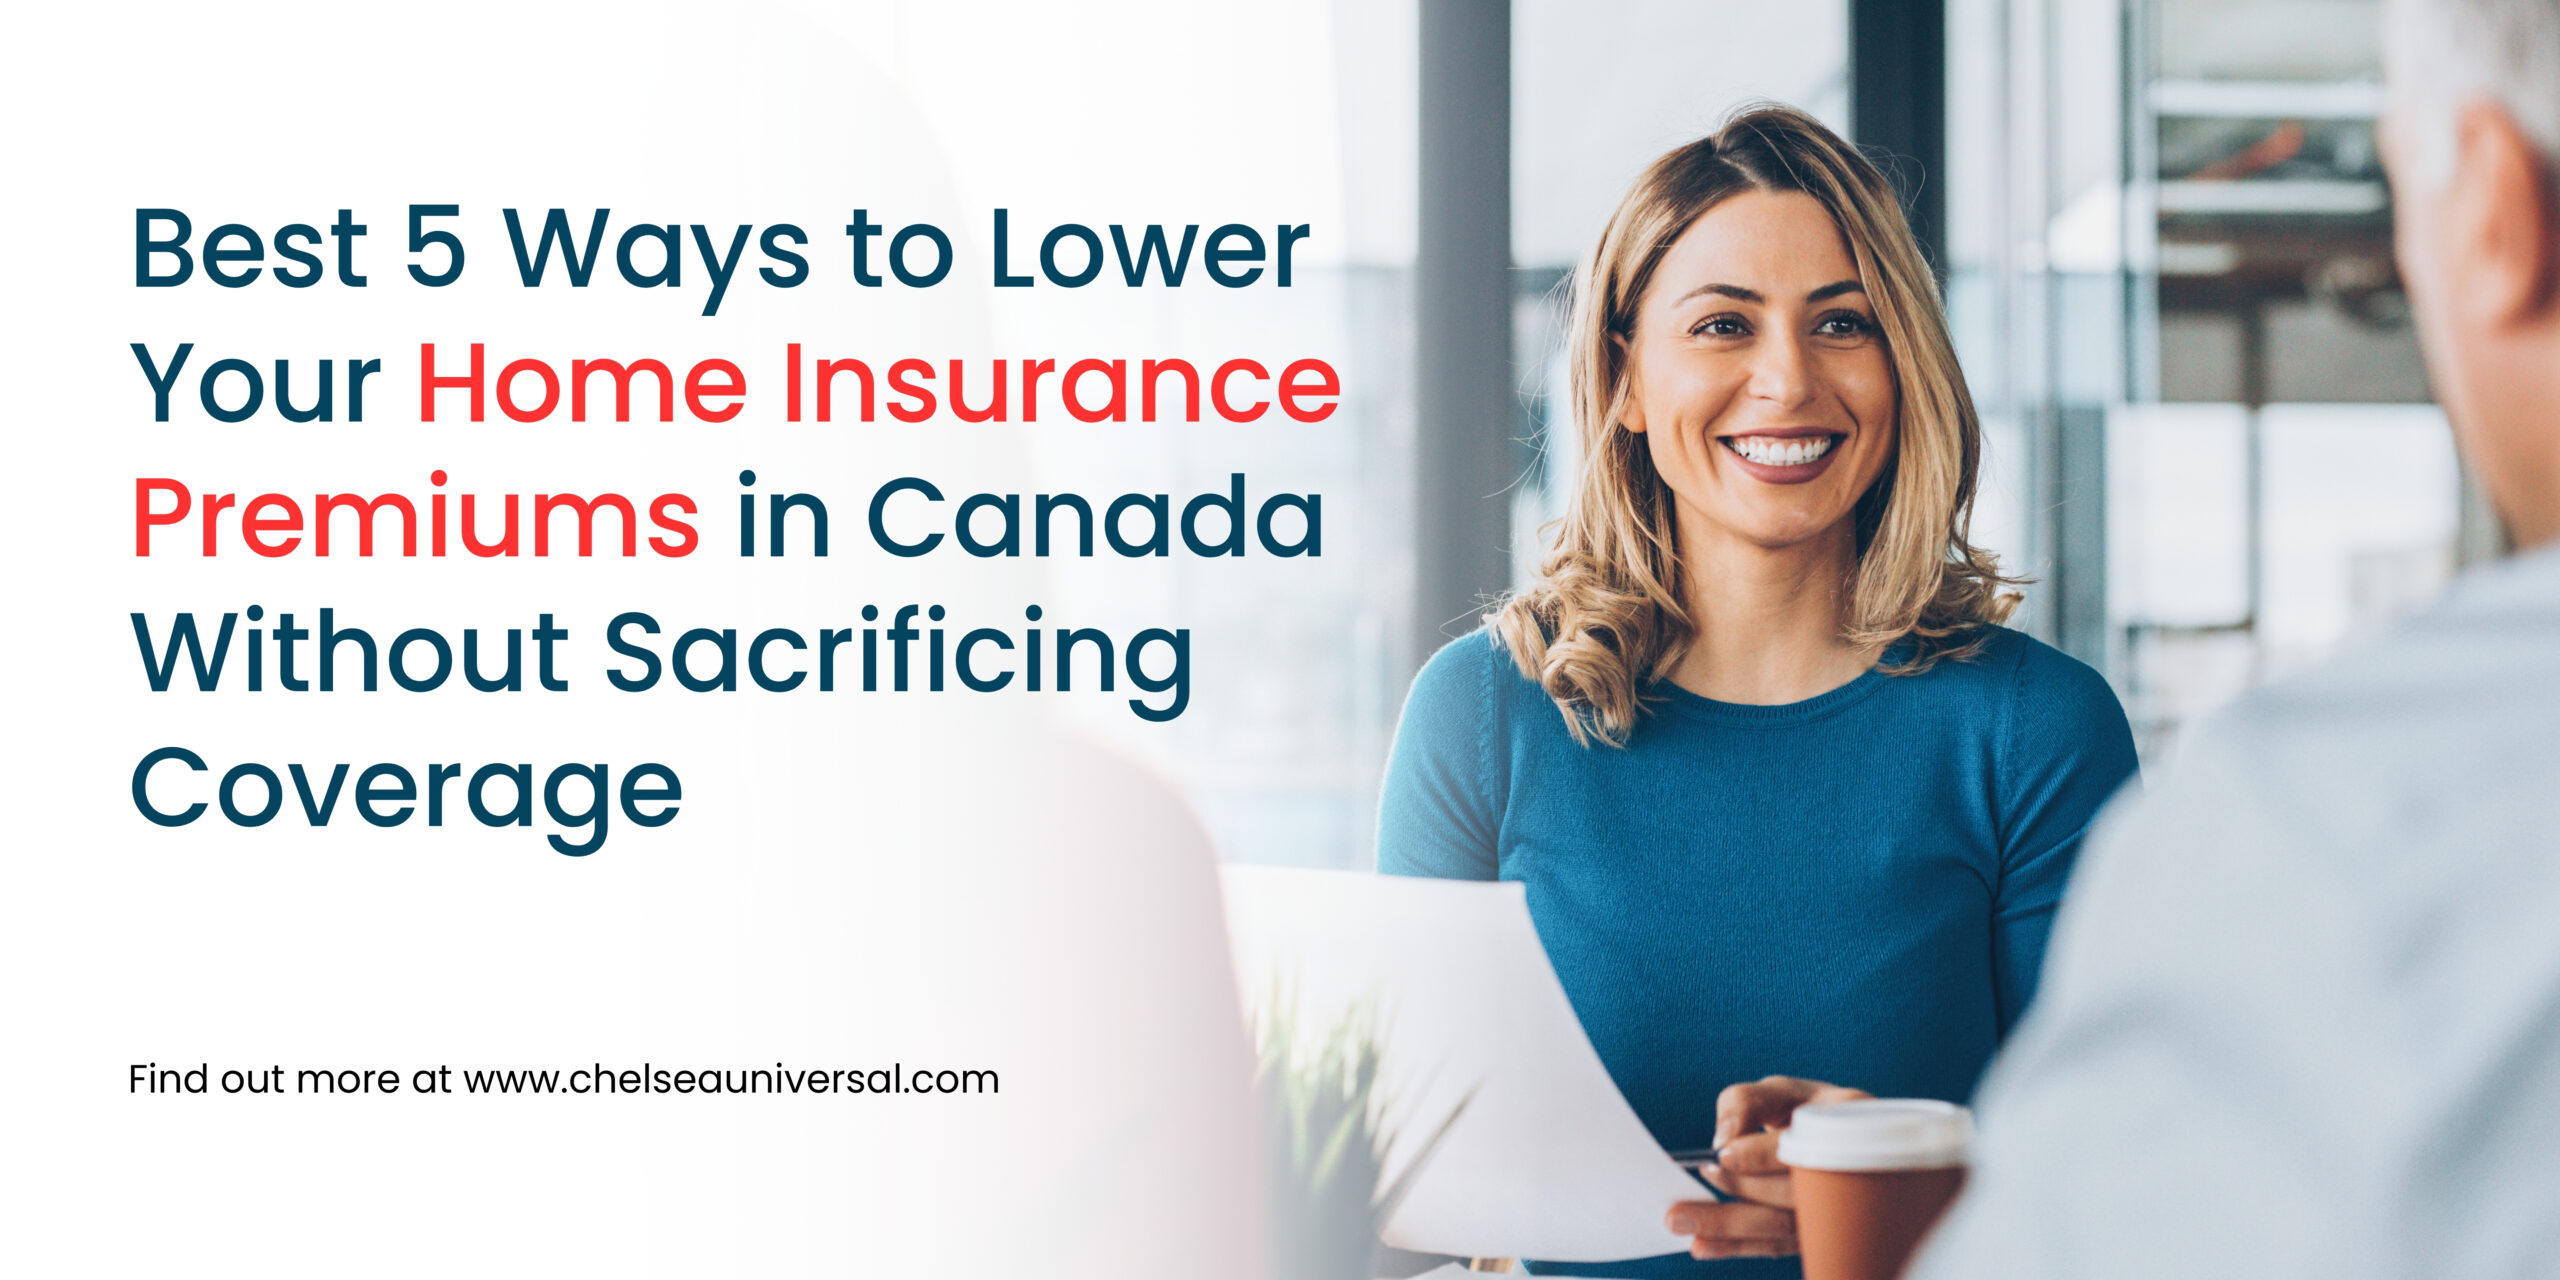 Best 5 Ways to Lower Your Home Insurance Premiums in Canada Without Sacrificing Your Coverage